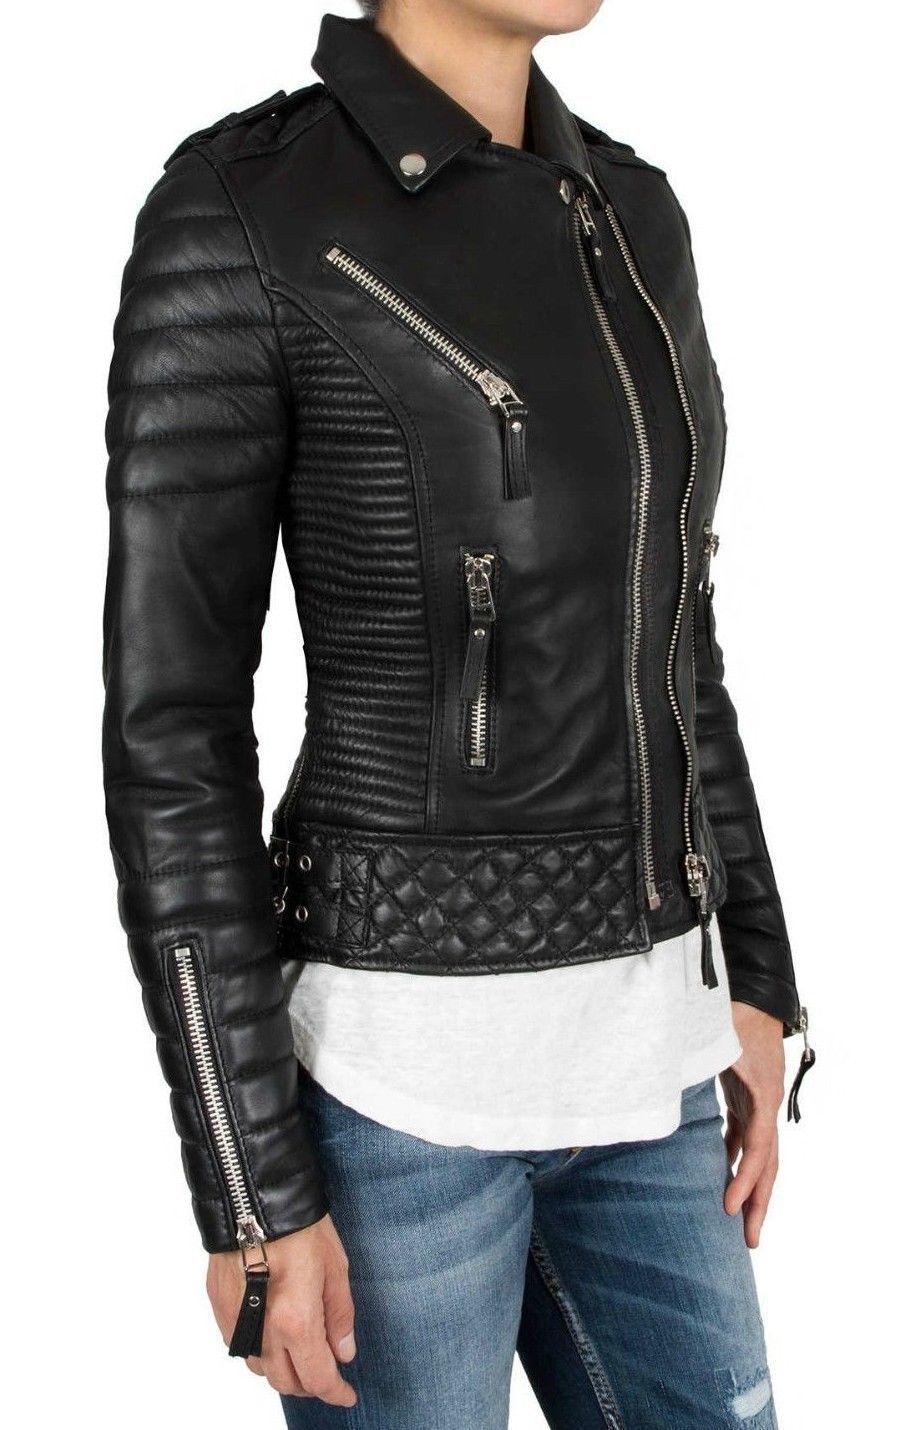 Black Women's Slim Fit Biker Diamond Quilted Kay Michaels Real Leather Jacket